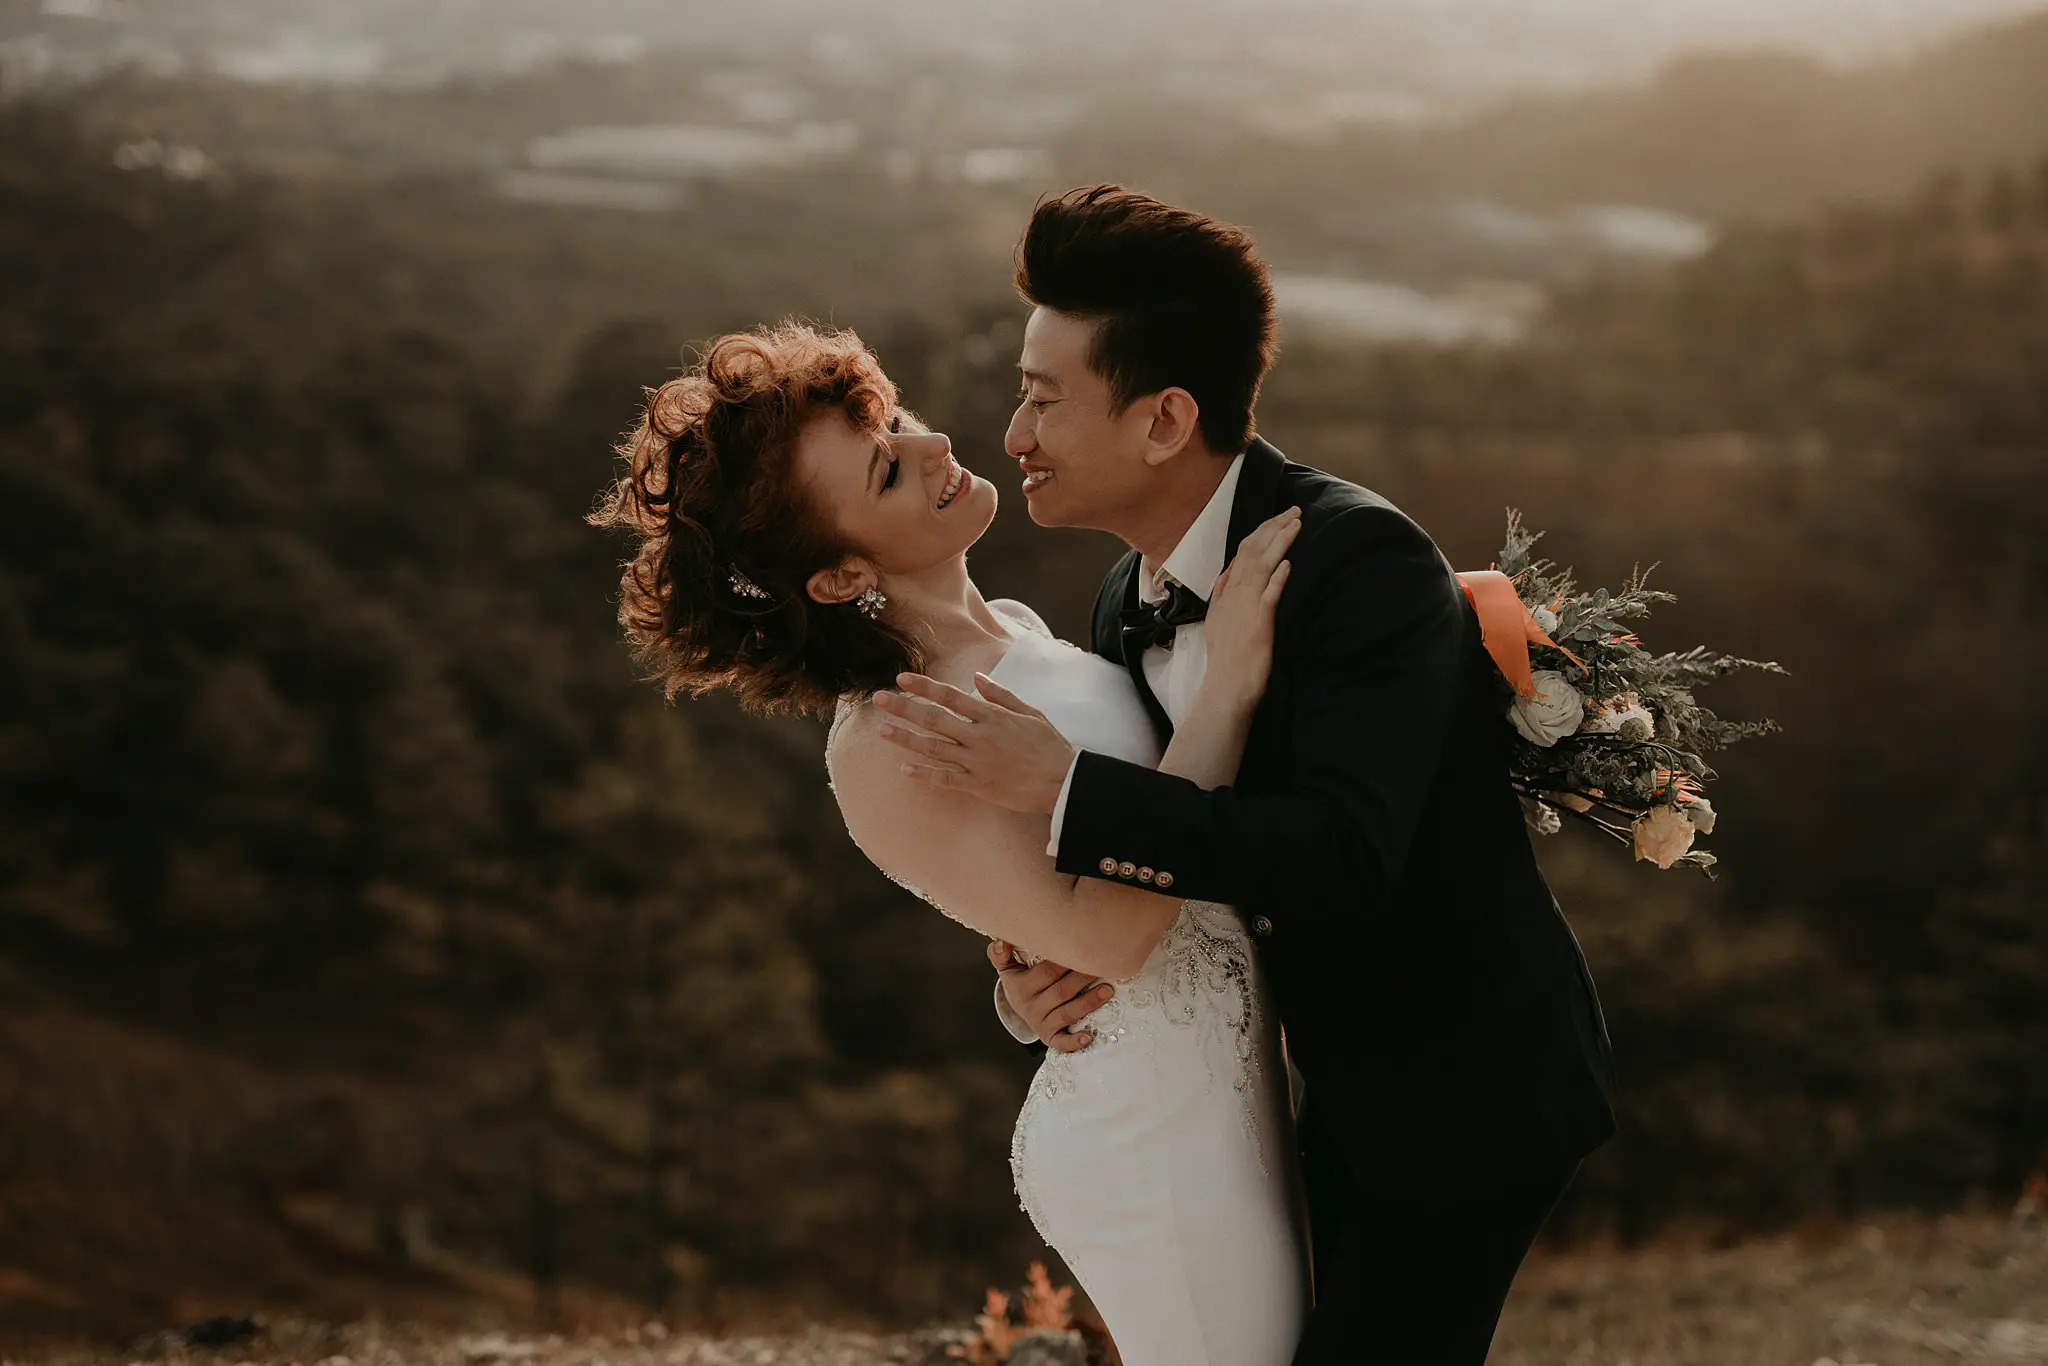 How to Plan a Dreamy Elopement in the Blue Mountains